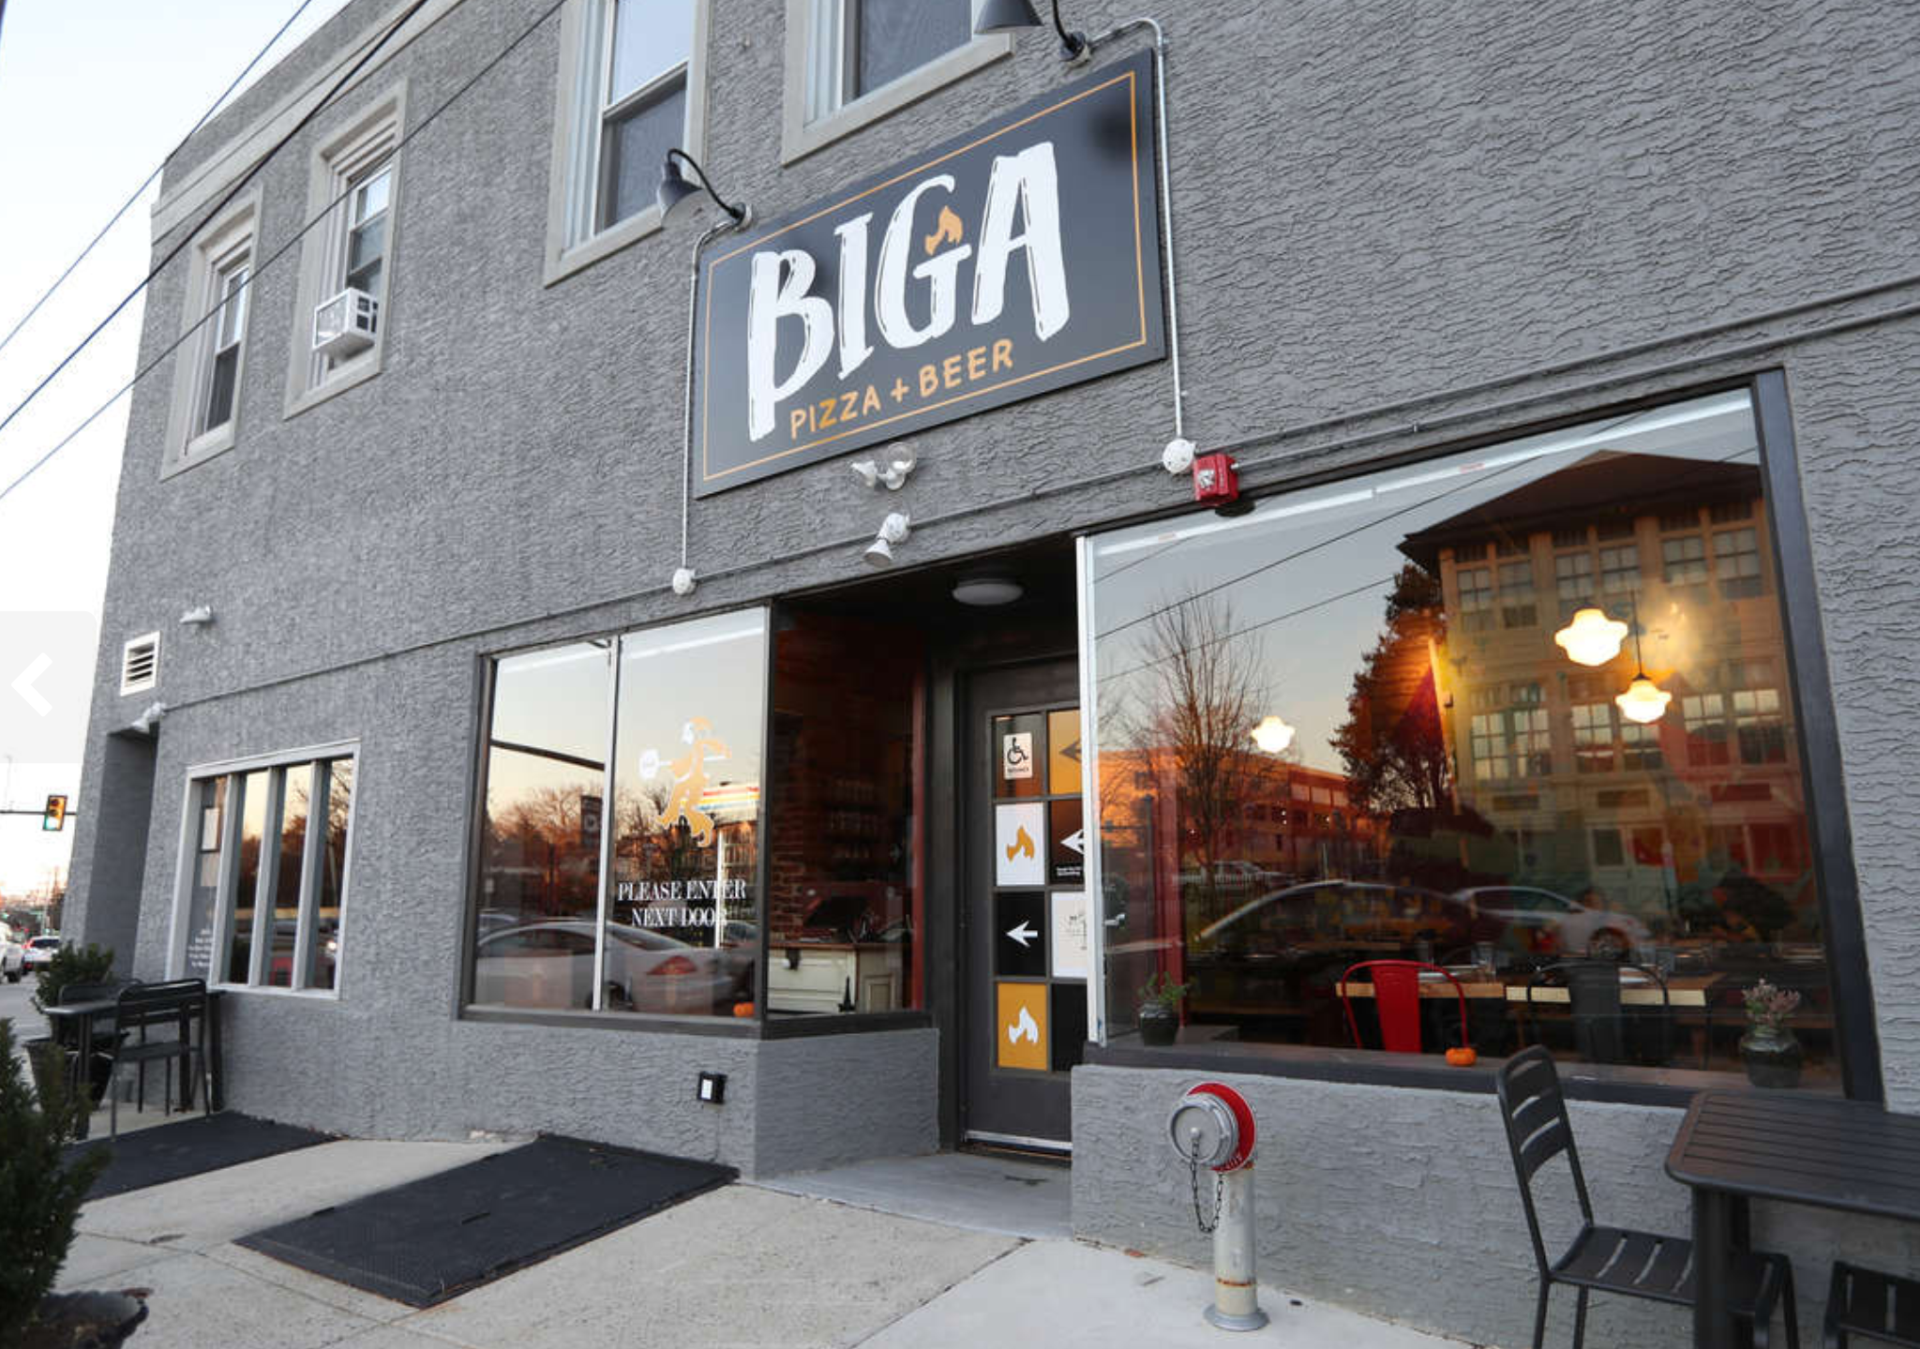 a building with a sign that says ' biga pizza beer ' on it